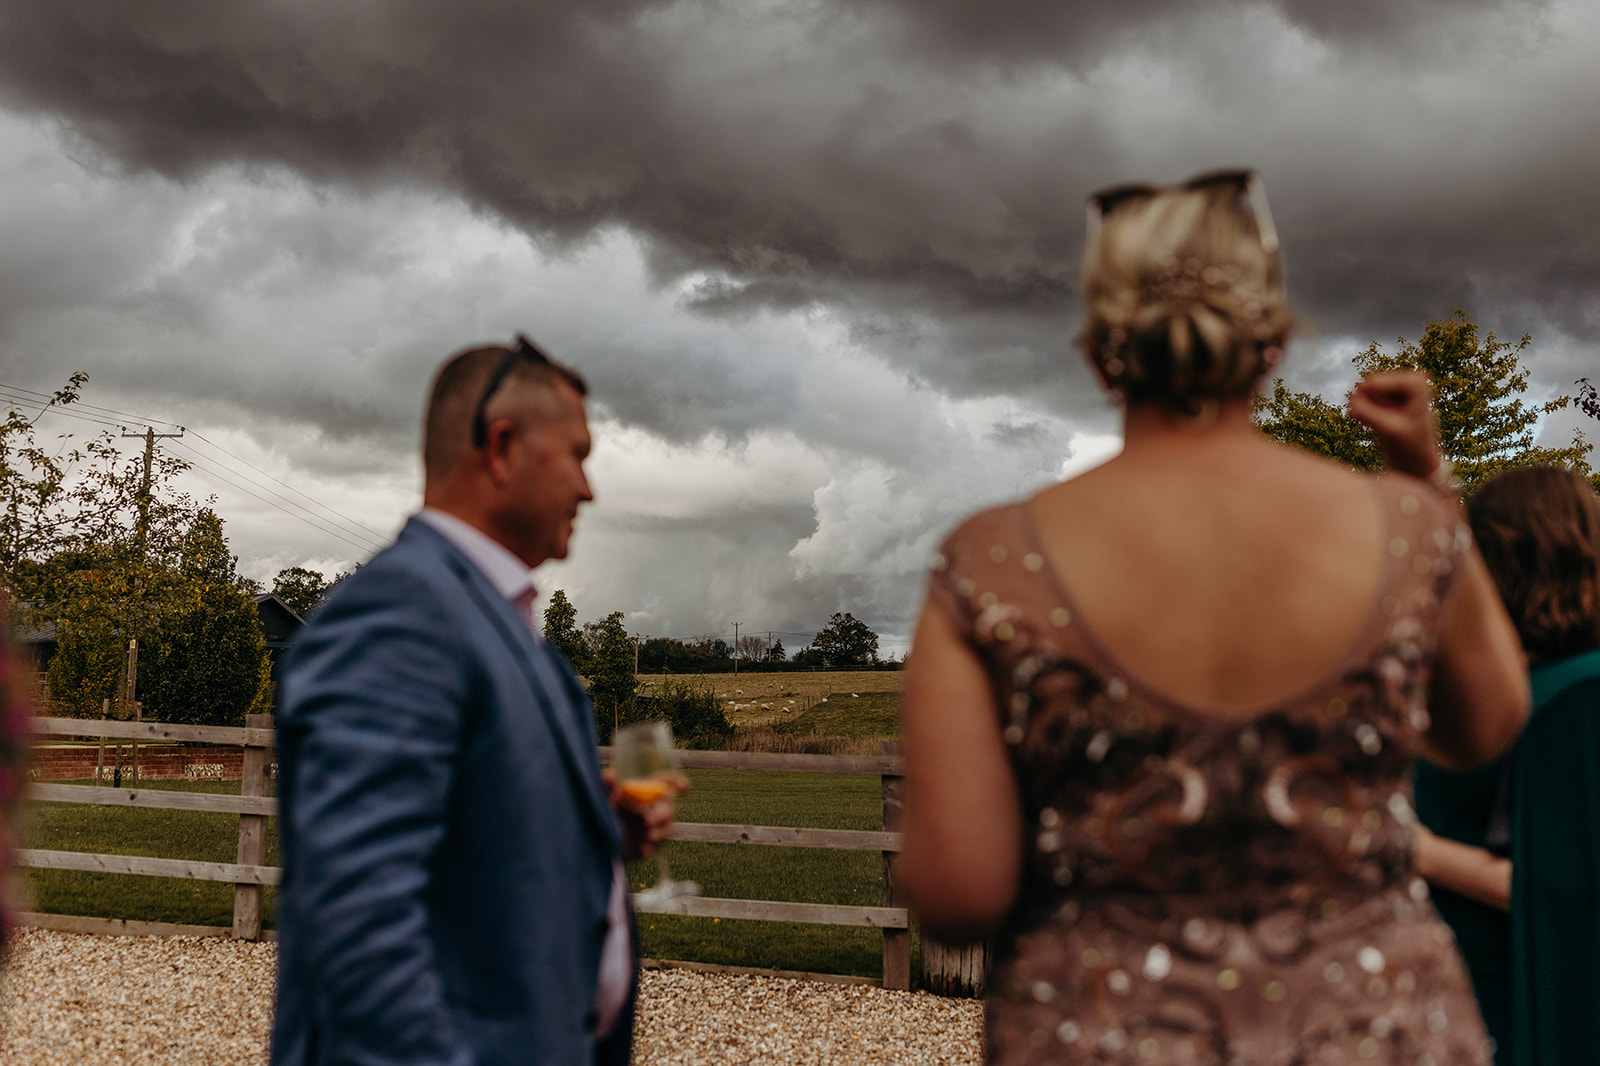 Dramatic skies with guests looking at them